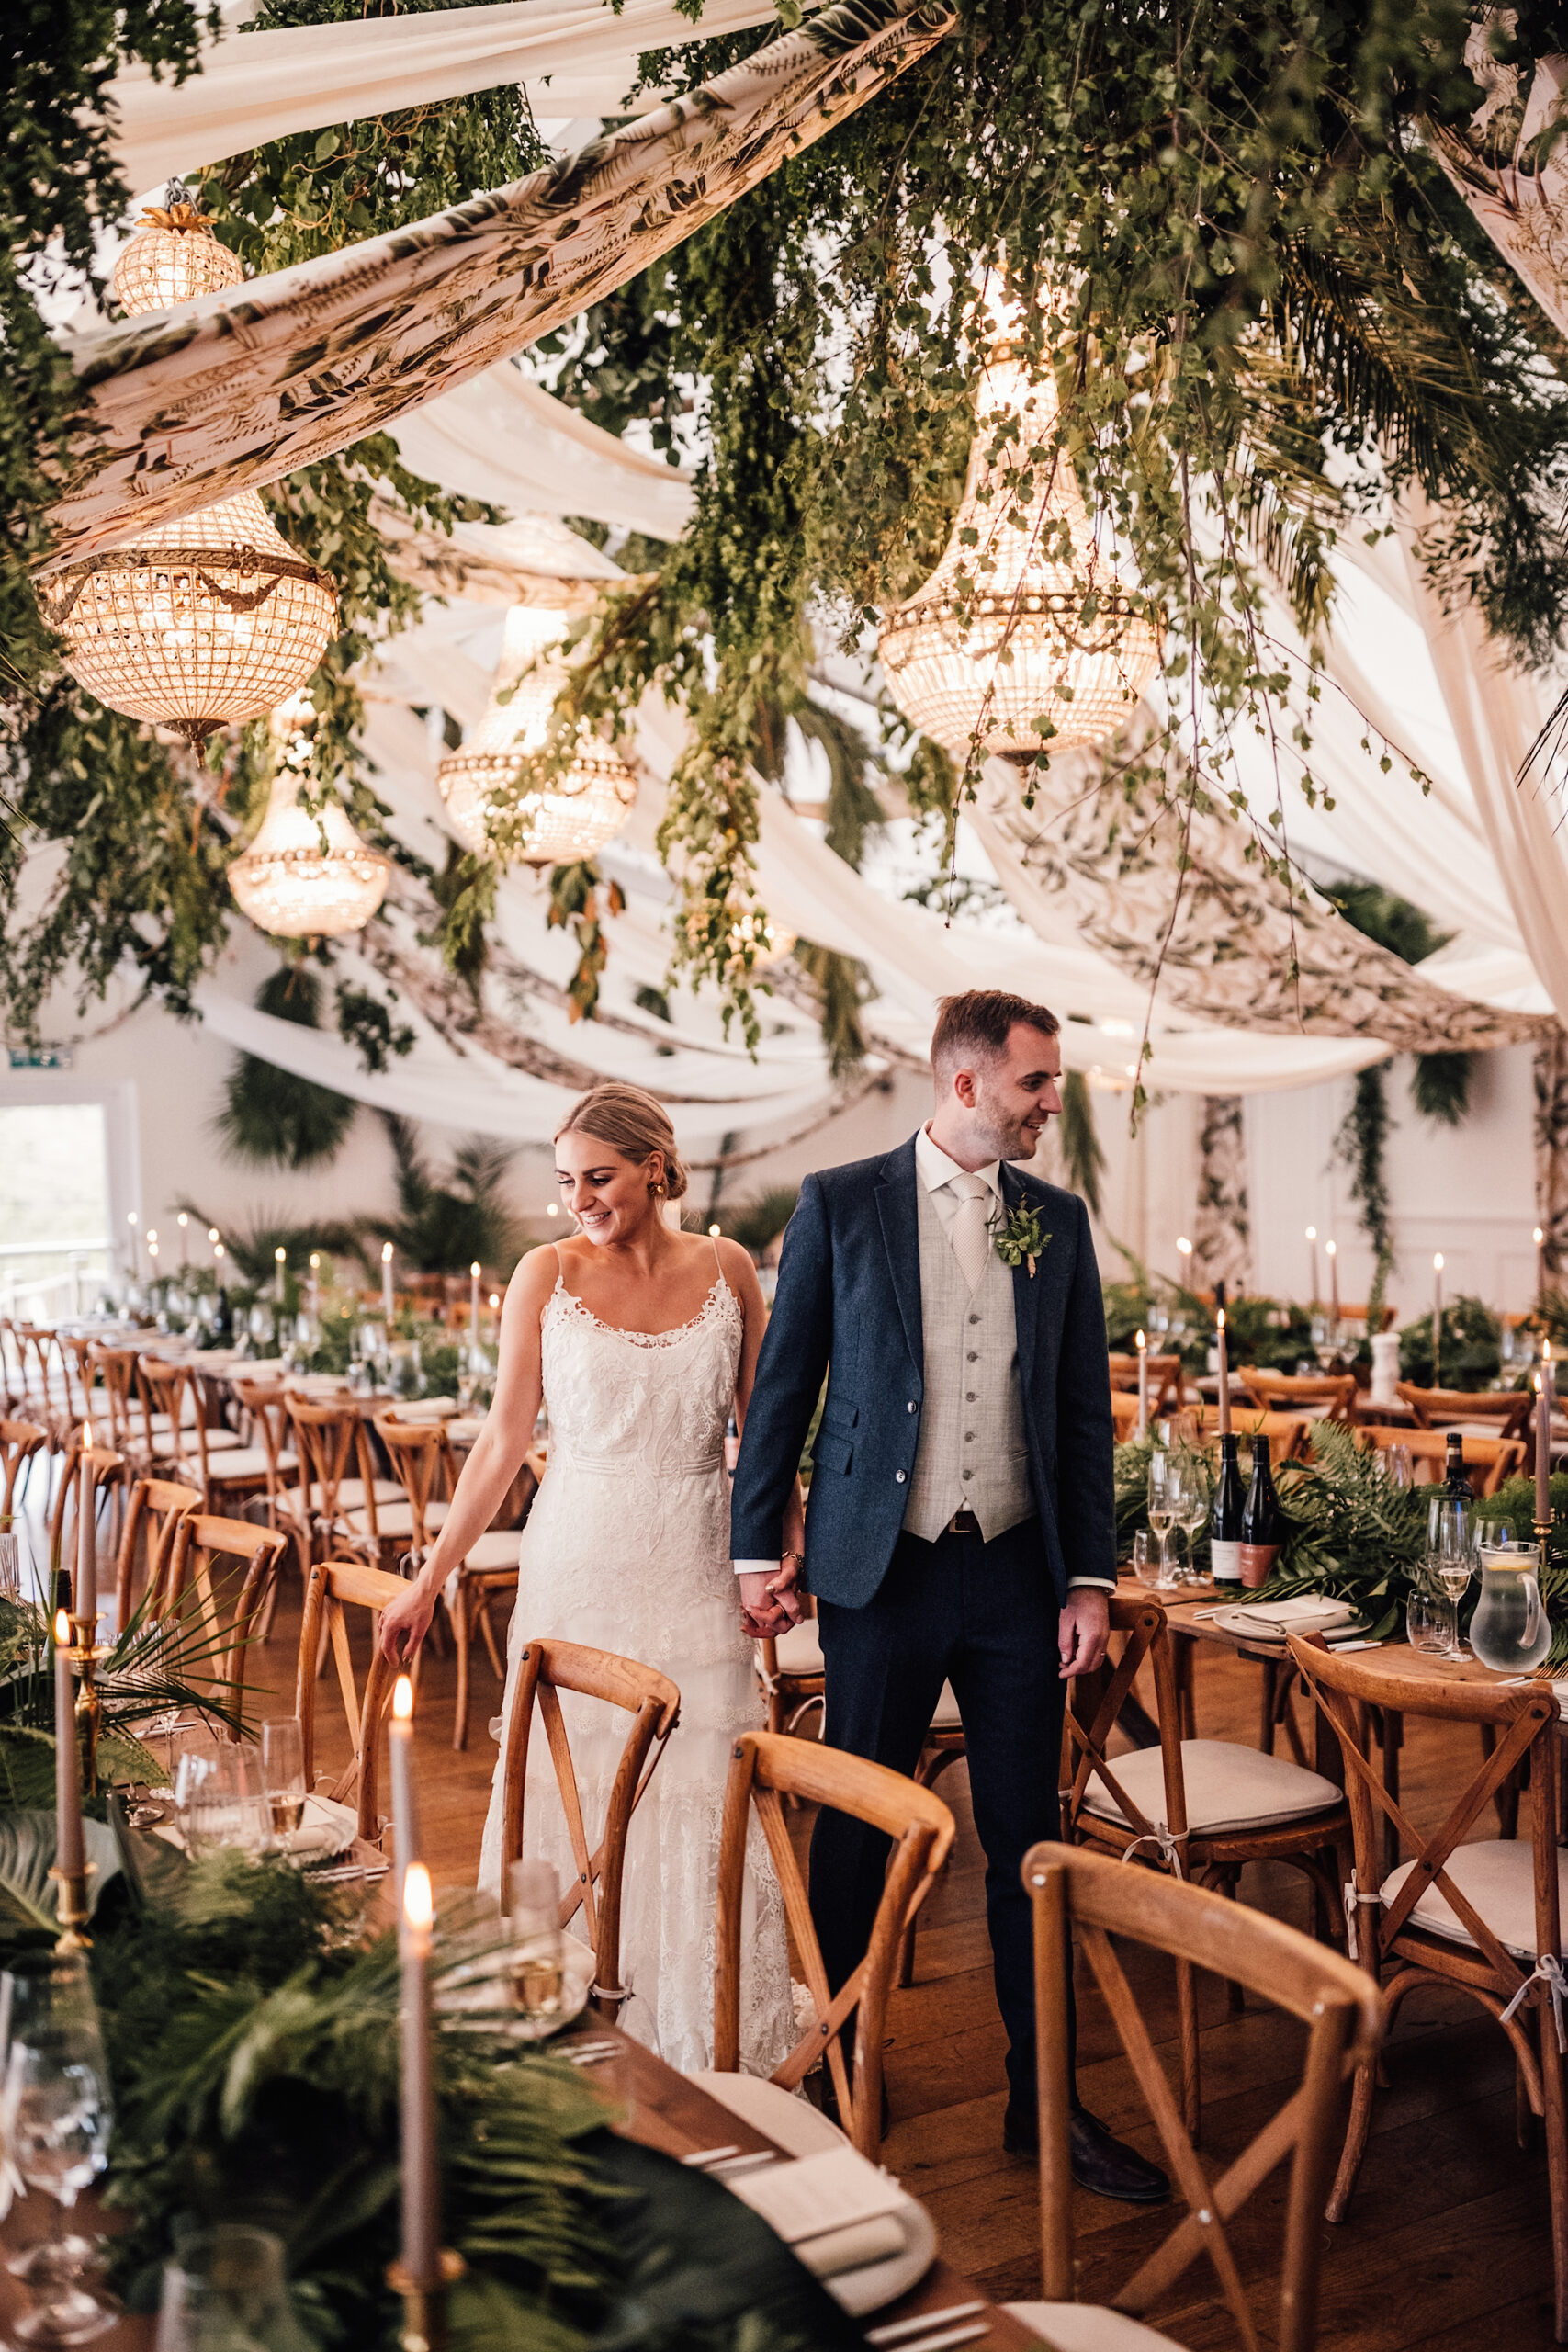 Natural greenery with a dash of luxury wedding marquee inspiration at Iscoyd Park Photographed by SAM DOCKER